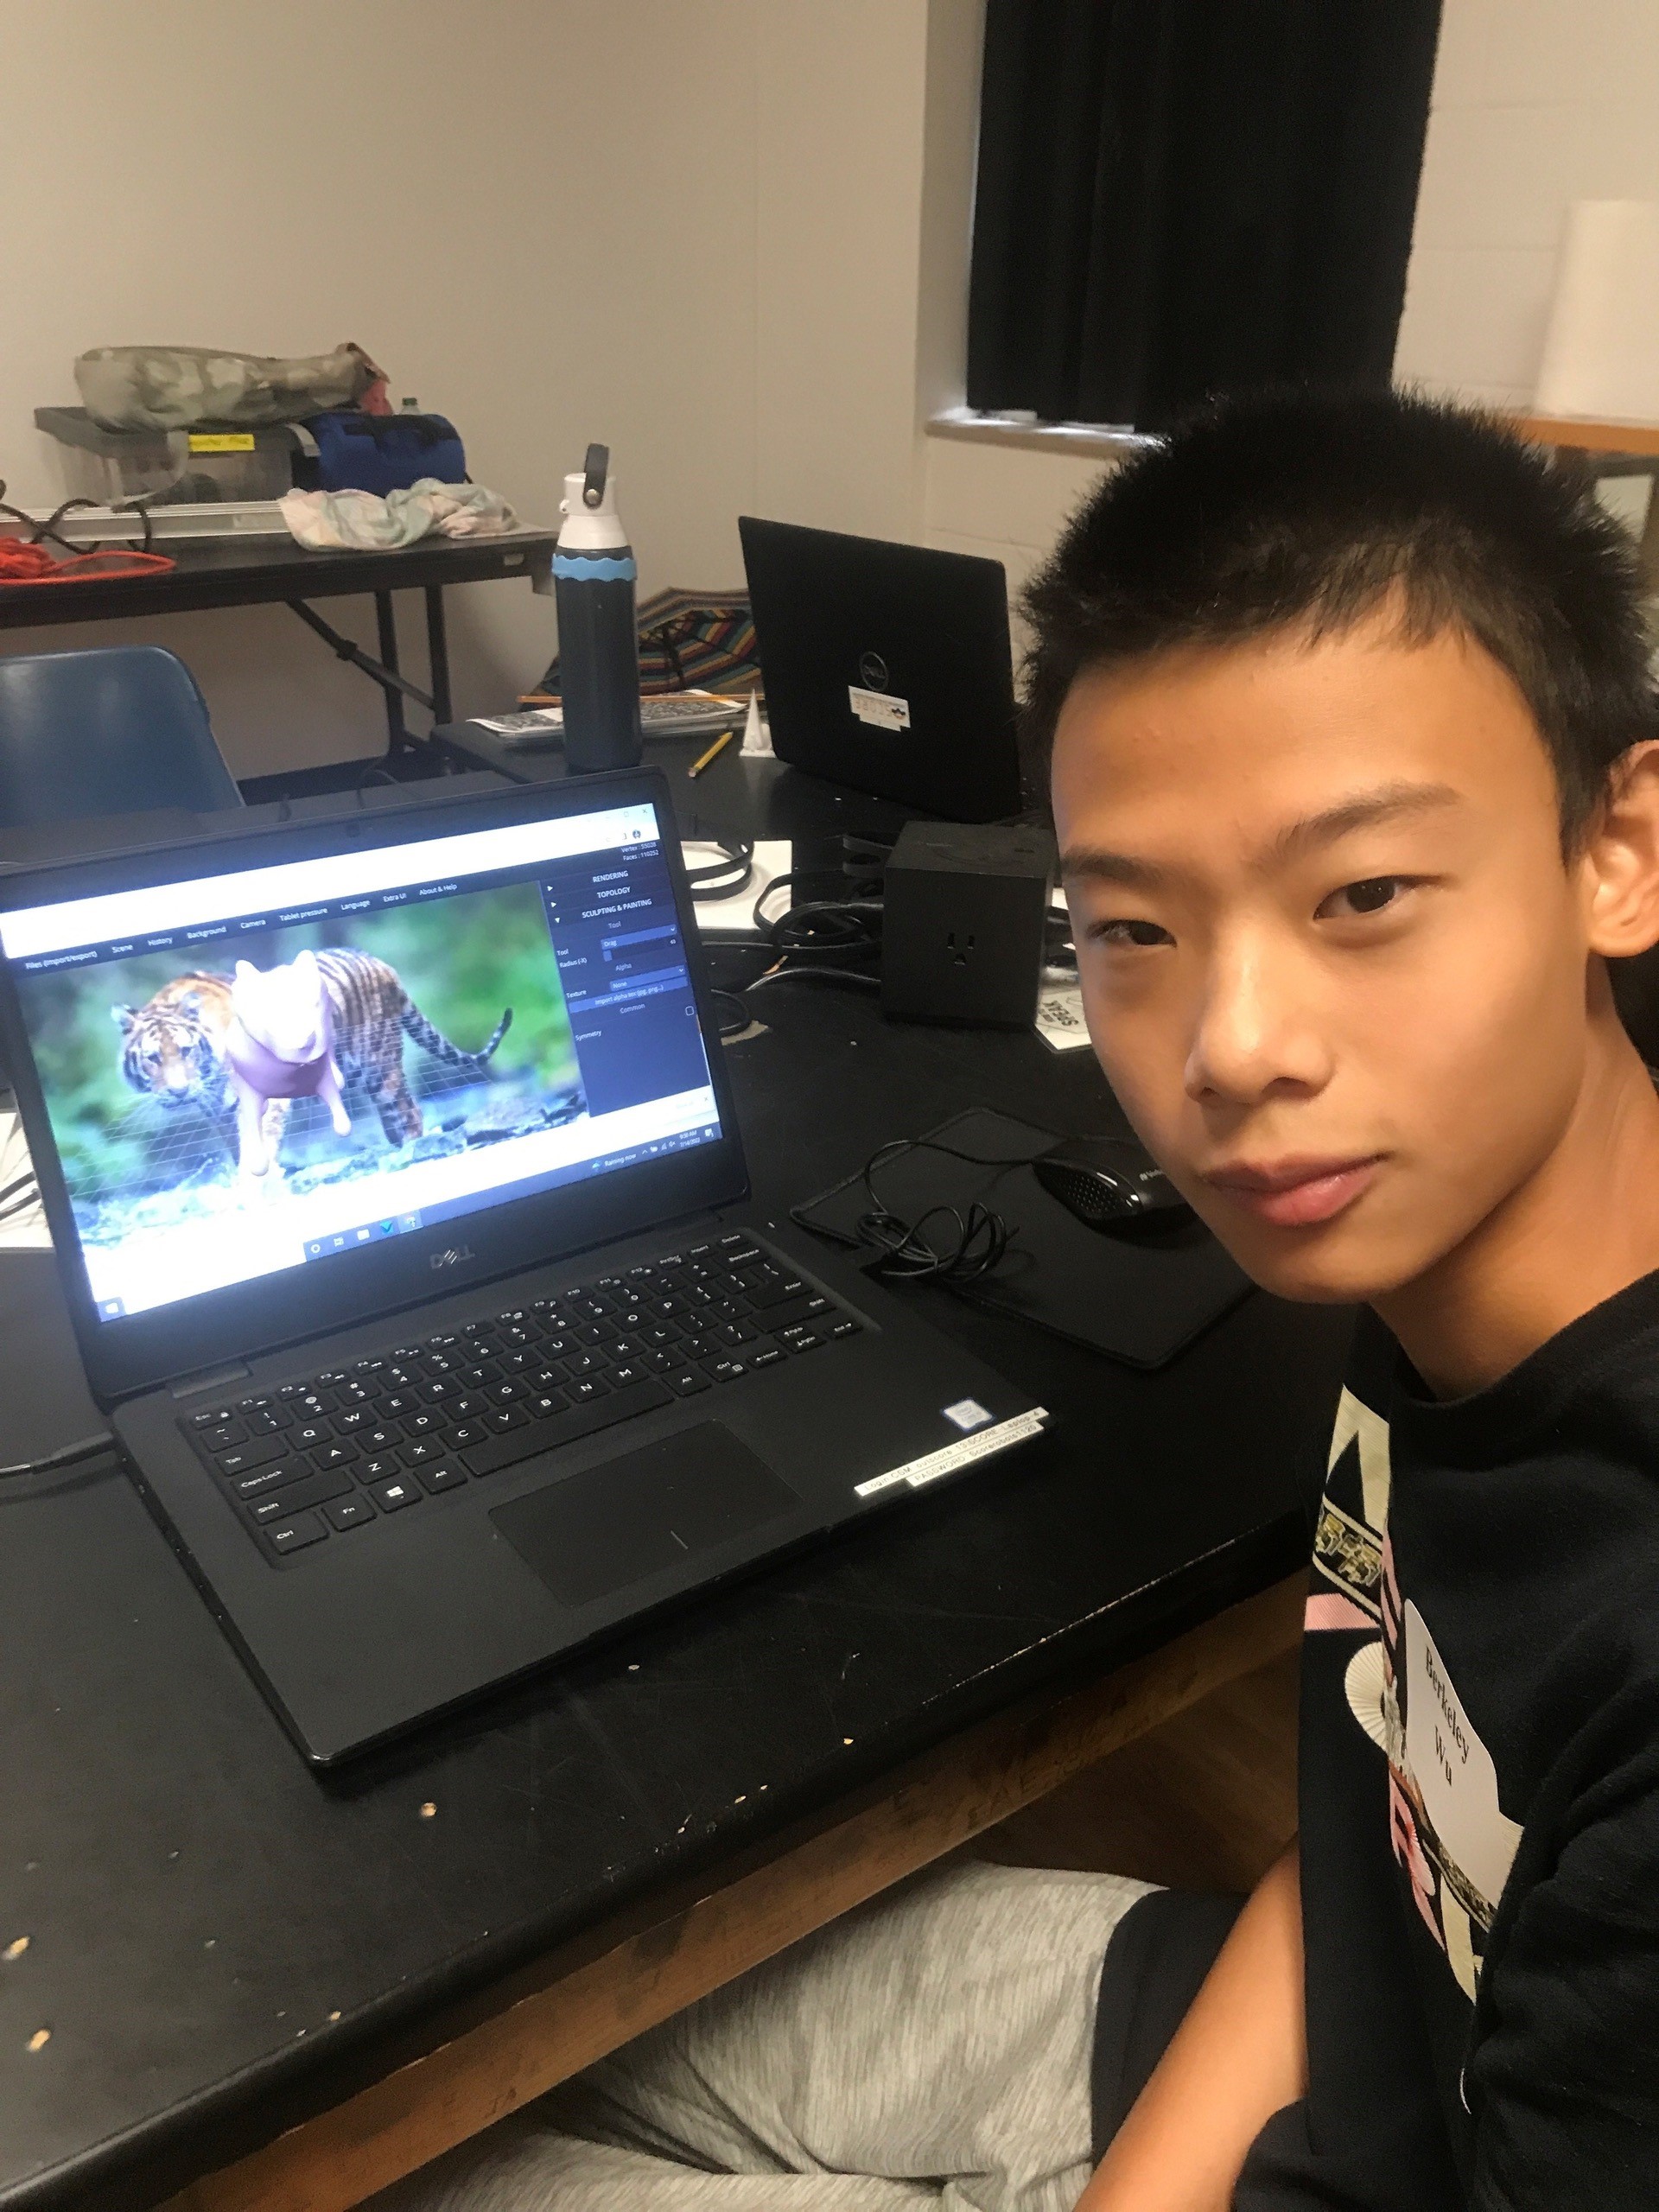 Berkeley Wu uses SculptGL to sculpt a 3D animal for the final project at SCORE’s introductory 3D printing and design camp.